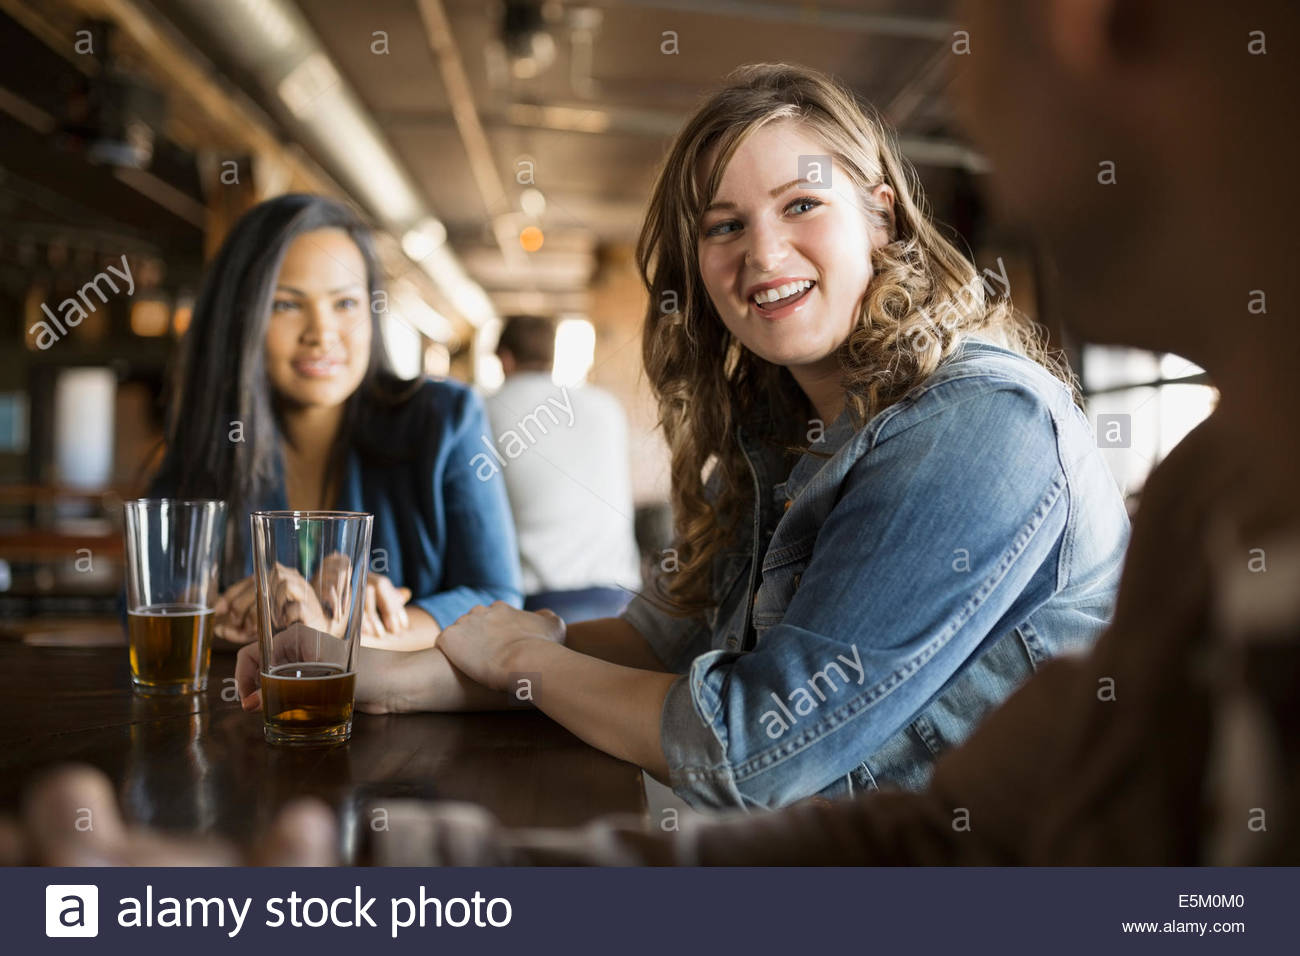 Friends drinking beer at pub Stock Photo